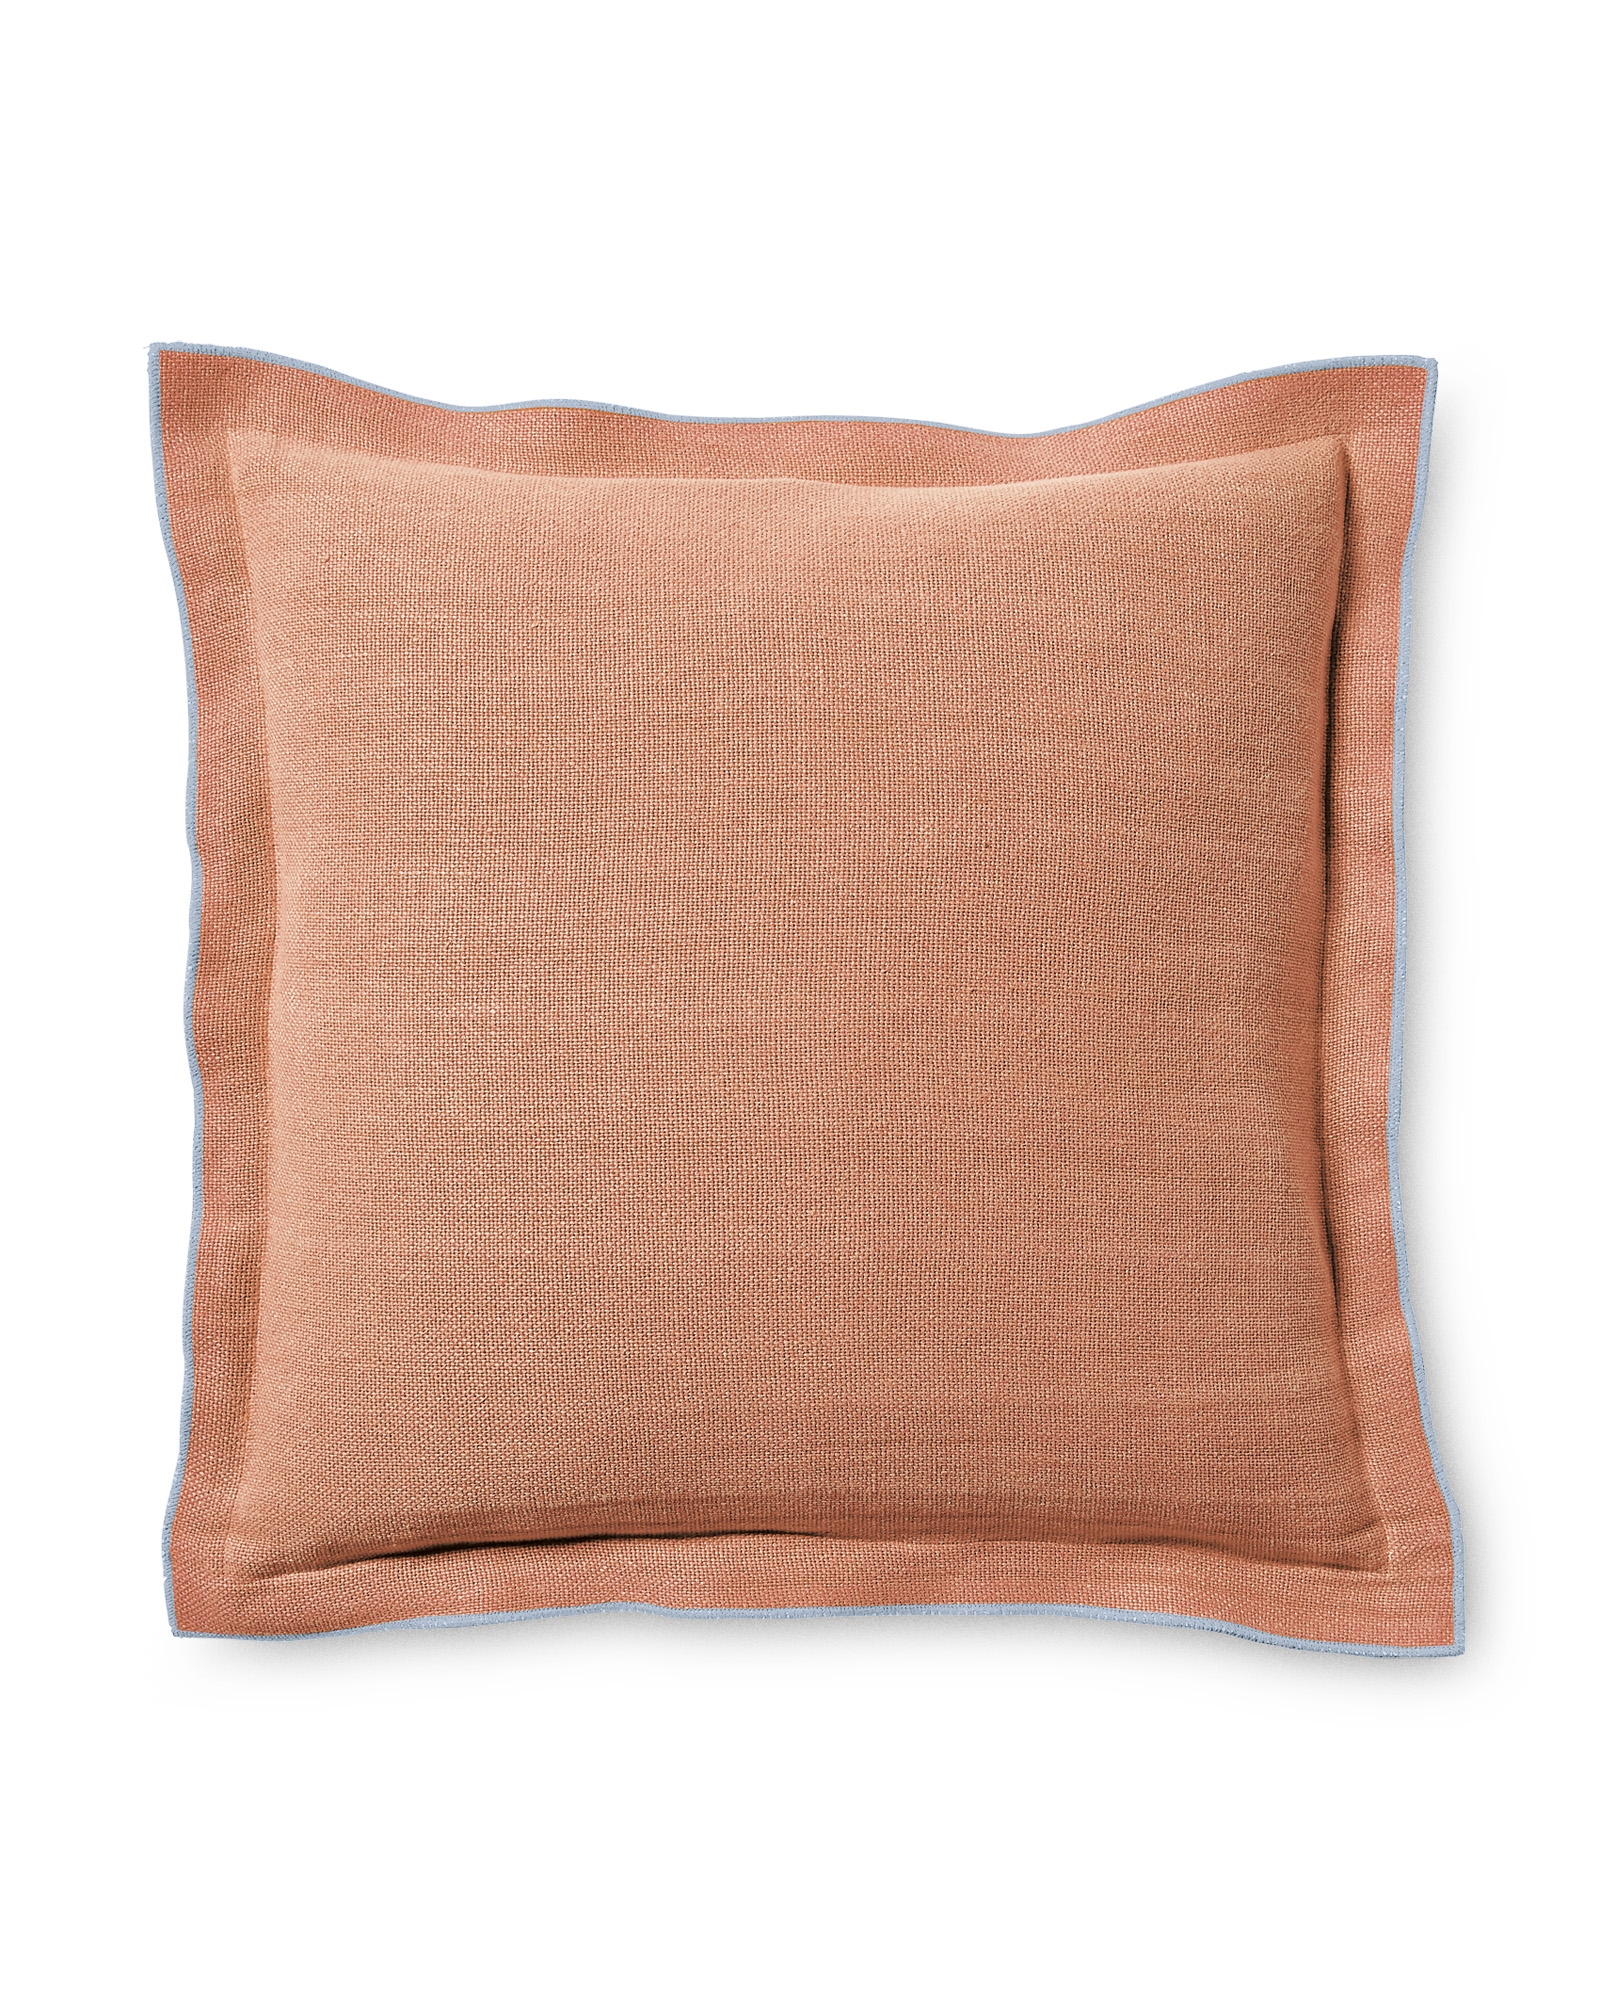 Chatham Pillow Covers - Image 0